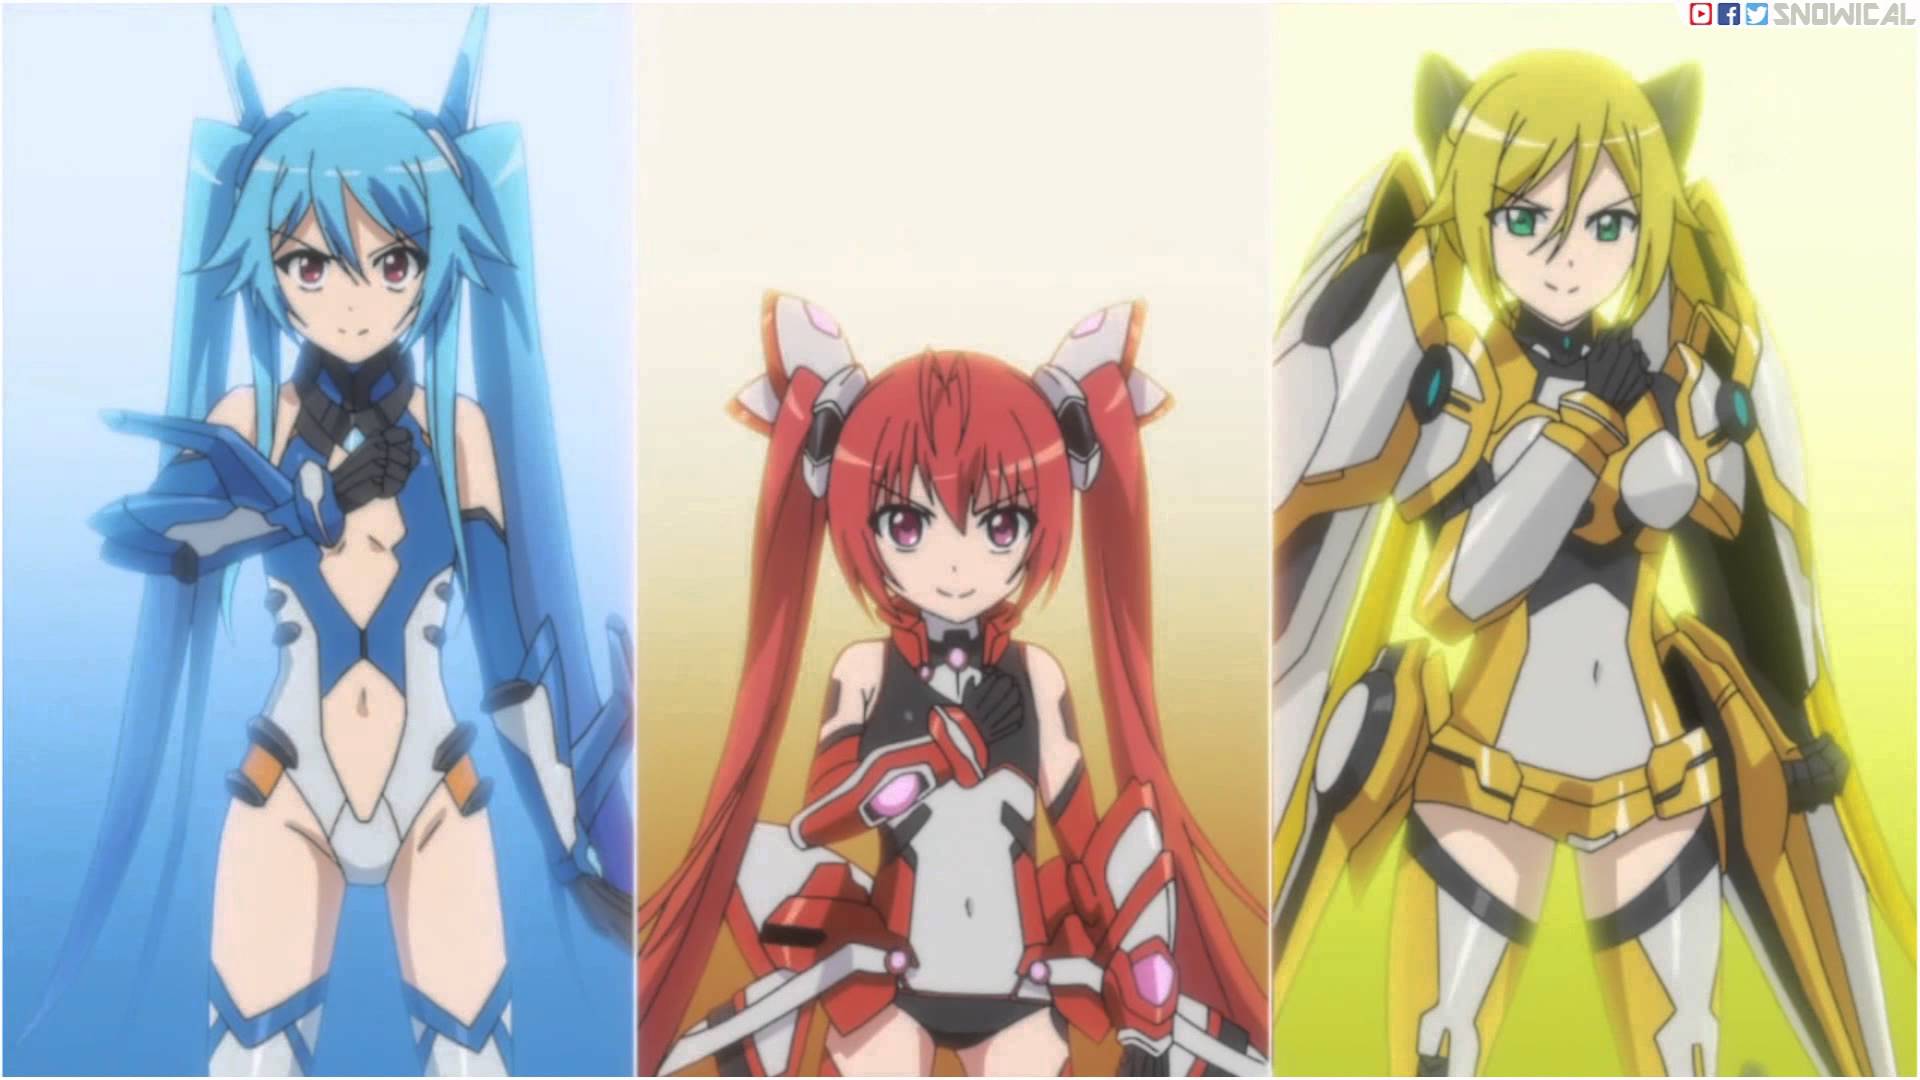 Gonna Be The Twin-Tail!! Backgrounds, Compatible - PC, Mobile, Gadgets| 1920x1080 px